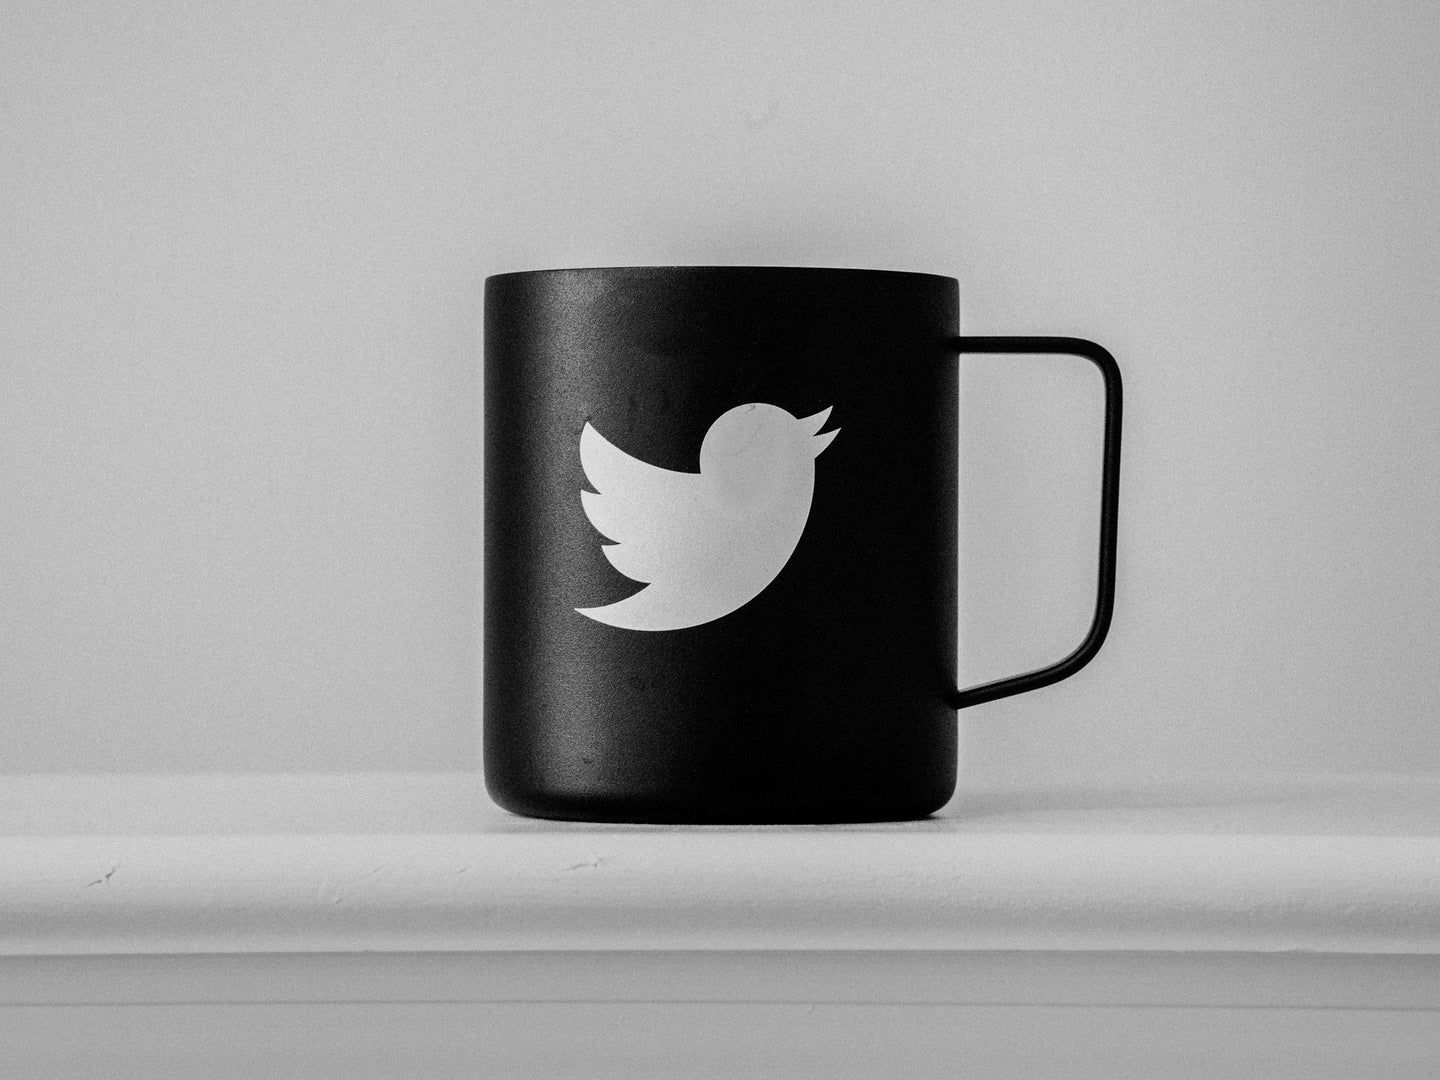 A black mug with a white Twitter bird logo on it. The mug is on a white surface in front of a white wall.